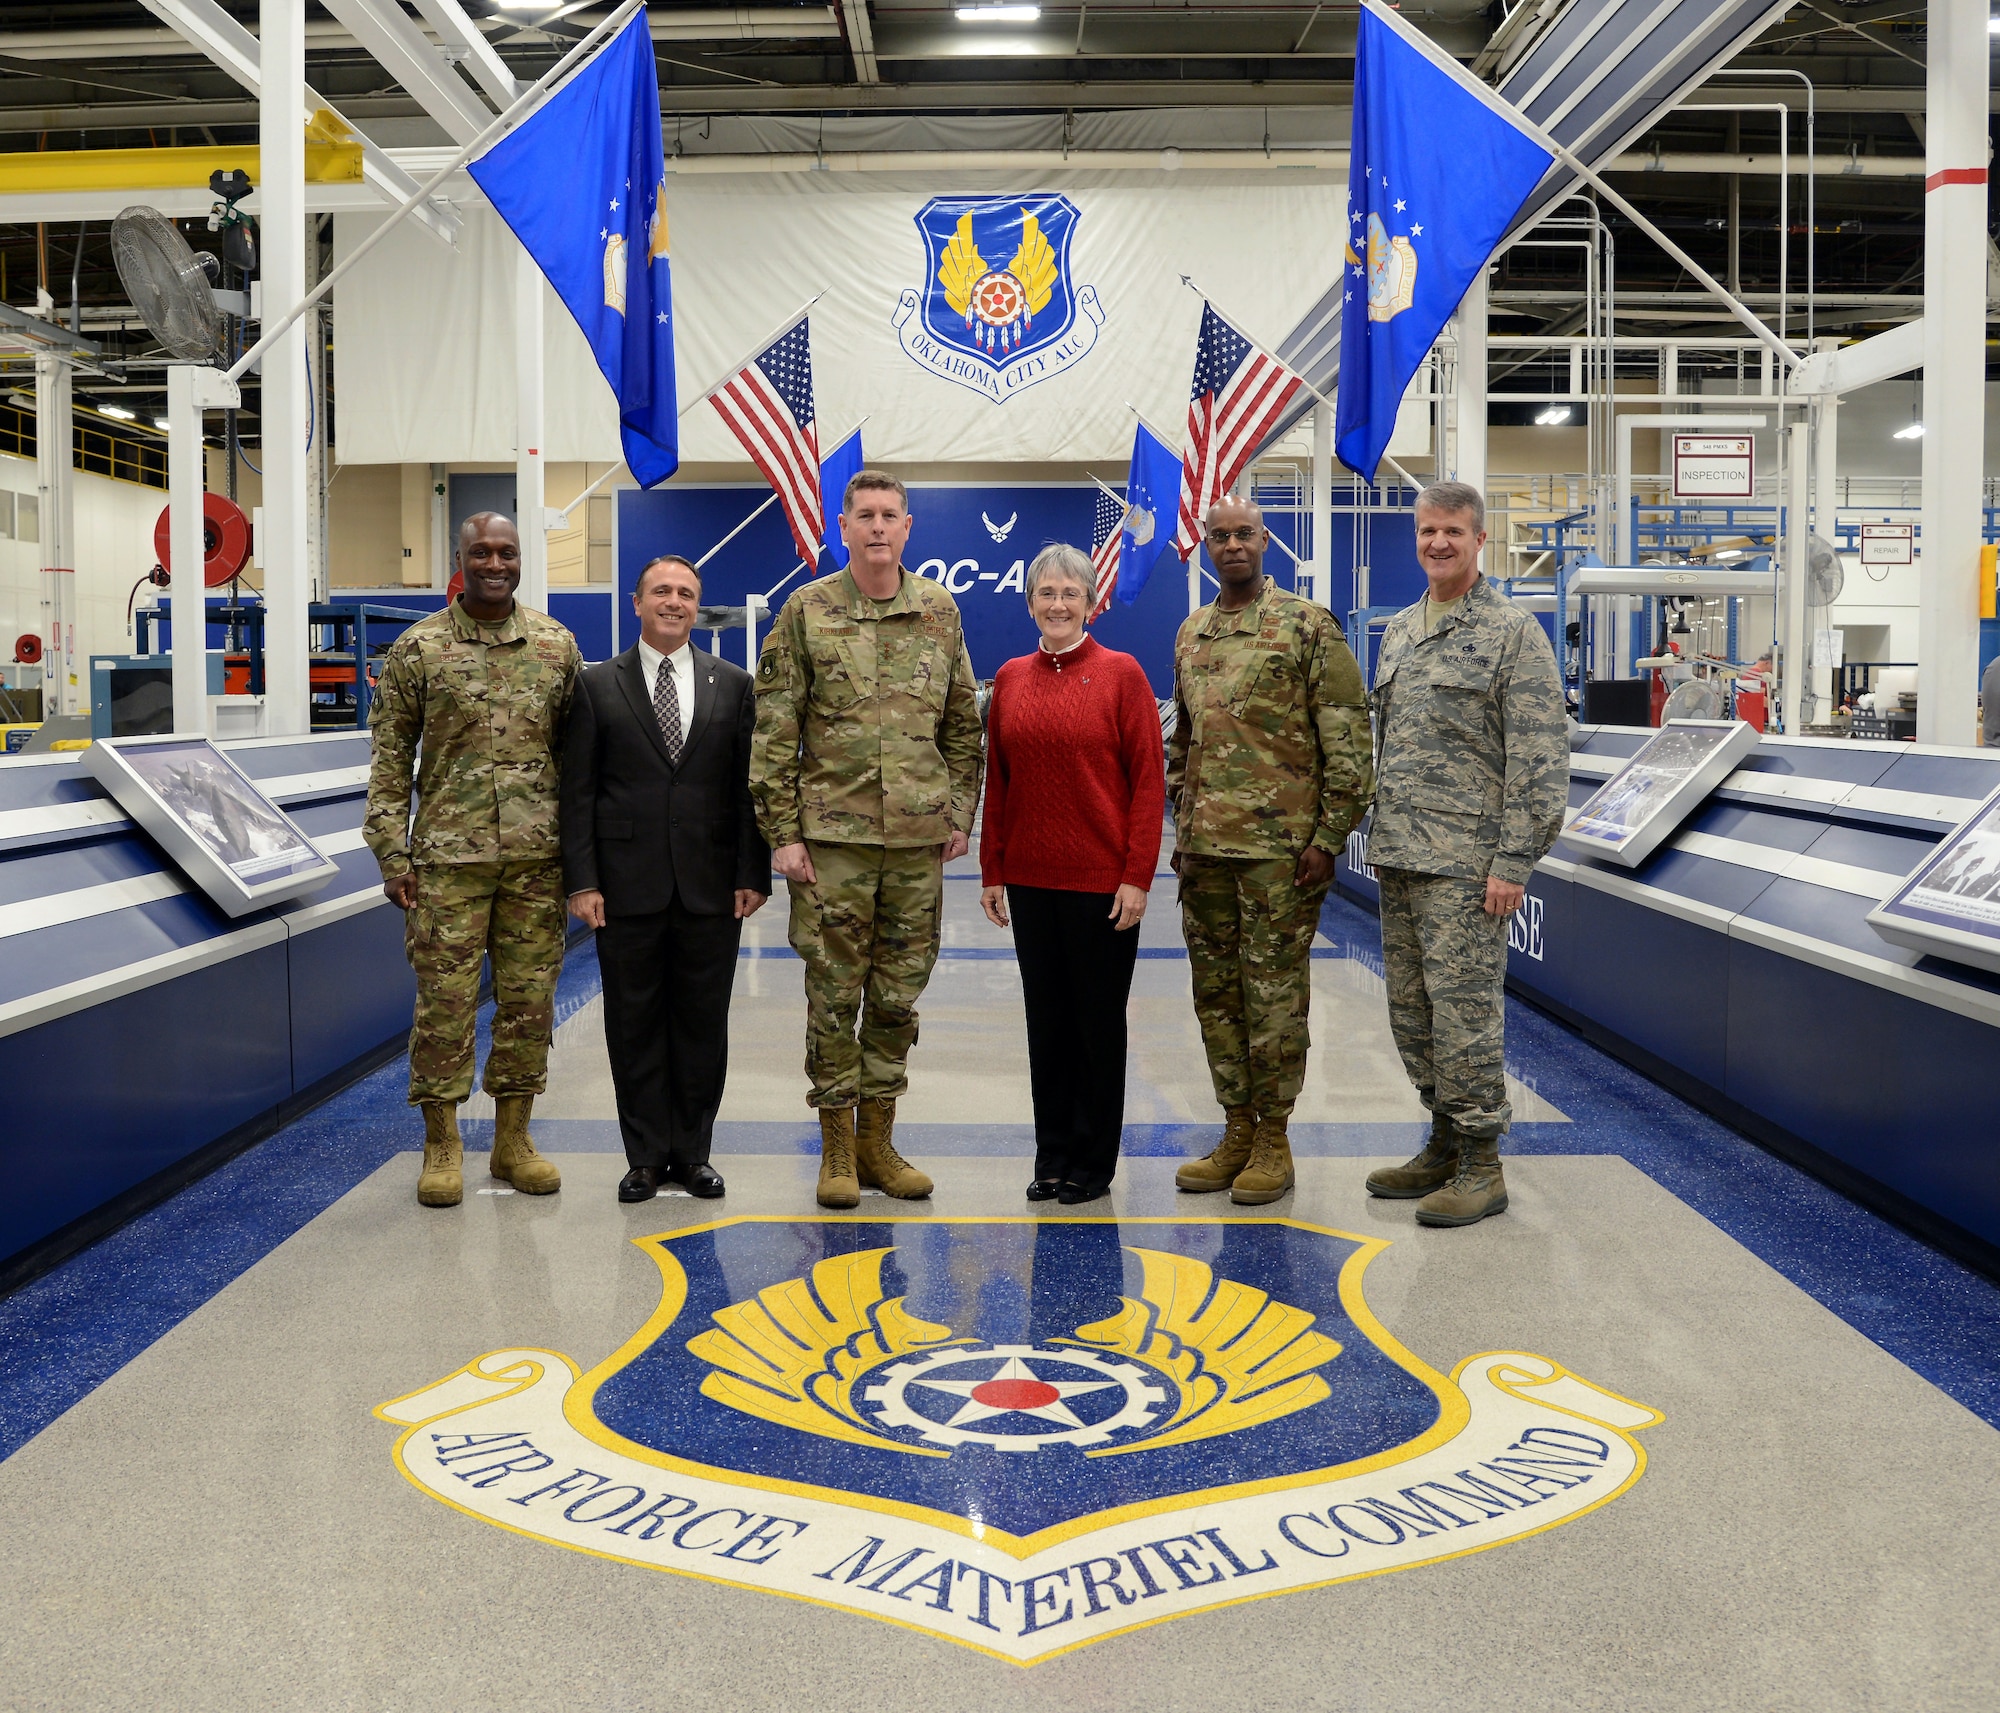 Col. Kenyon Bell, 72nd Air Base Wing commander; Kevin Stamey, Air Force Sustainment Center executive director; Lt. Gen. Gene Kirkland, AFSC commander; Secretary of the Air Force Heather Wilson; Maj. Gen. Cedric George, director of Logistics, deputy chief of staff for Logistics, Engineering and Force Protection and Brig. Gen. Christopher Hill, Oklahoma City Air Logistics Complex commander pose for a photo with the Air Force Materiel Command emblem located at Hollywood and Vine in Bldg. 3001. Wilson visited Tinker Nov. 16 and toured several facilities and organizations. She announced at the end of her tour that Tinker Air Force Base has been selected as the base that will support the maintenance and sustainment operations for the B-21 Raider, the next generation long-range bomber sometime in the mid-2020s.